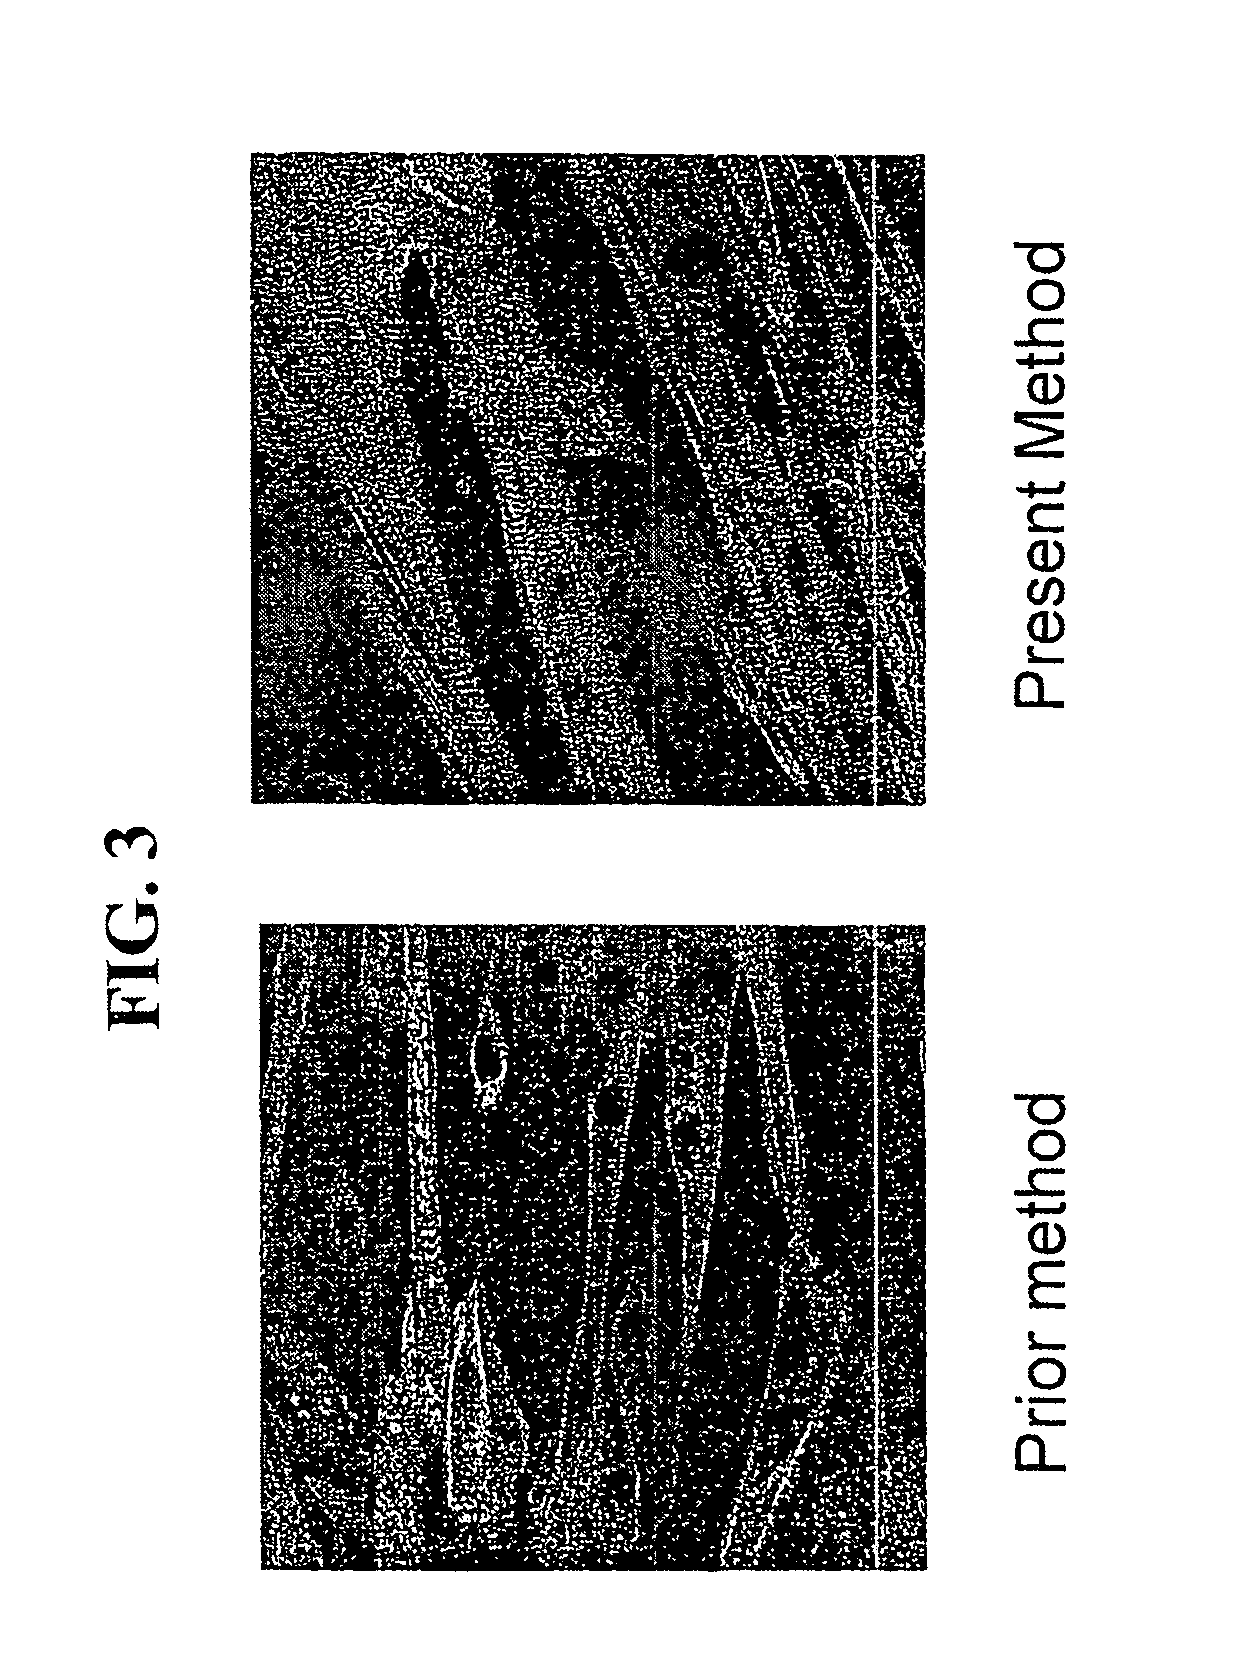 Cultured muscle cells with high metabolic activity and method for production of the cultured muscle cells